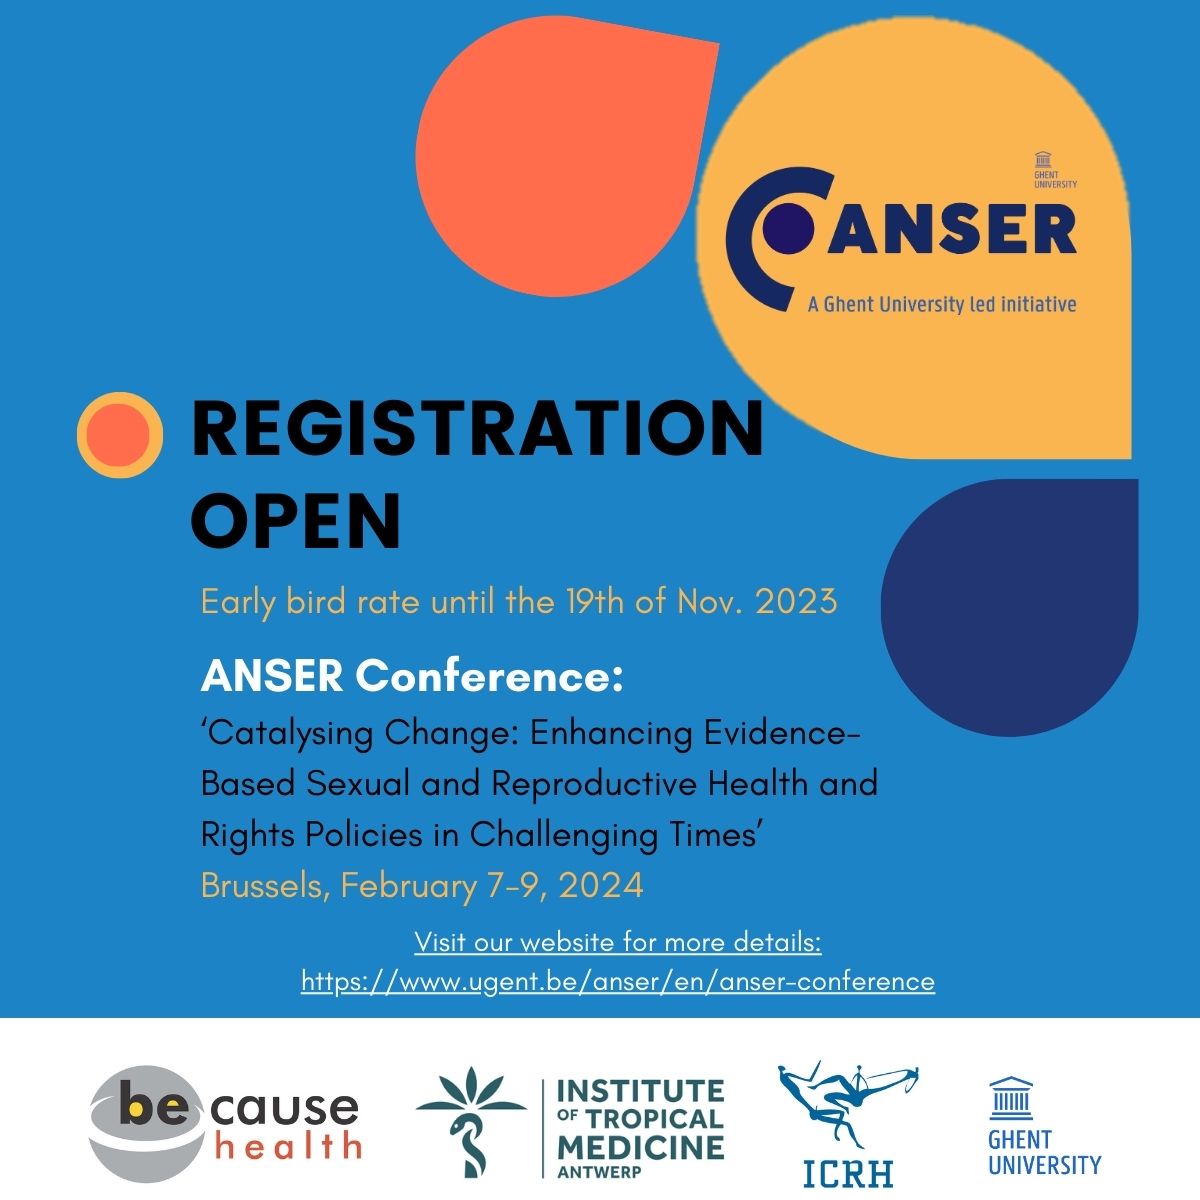 📢 REGISTRATION NOW OPEN To register for the ANSER Conference ’Catalysing Change: Enhancing Evidence-Based Sexual and Reproductive Health and Rights Policies in Challenging Times’ (7-9 Feb 2024) please check: ugent.be/anser/en/anser…